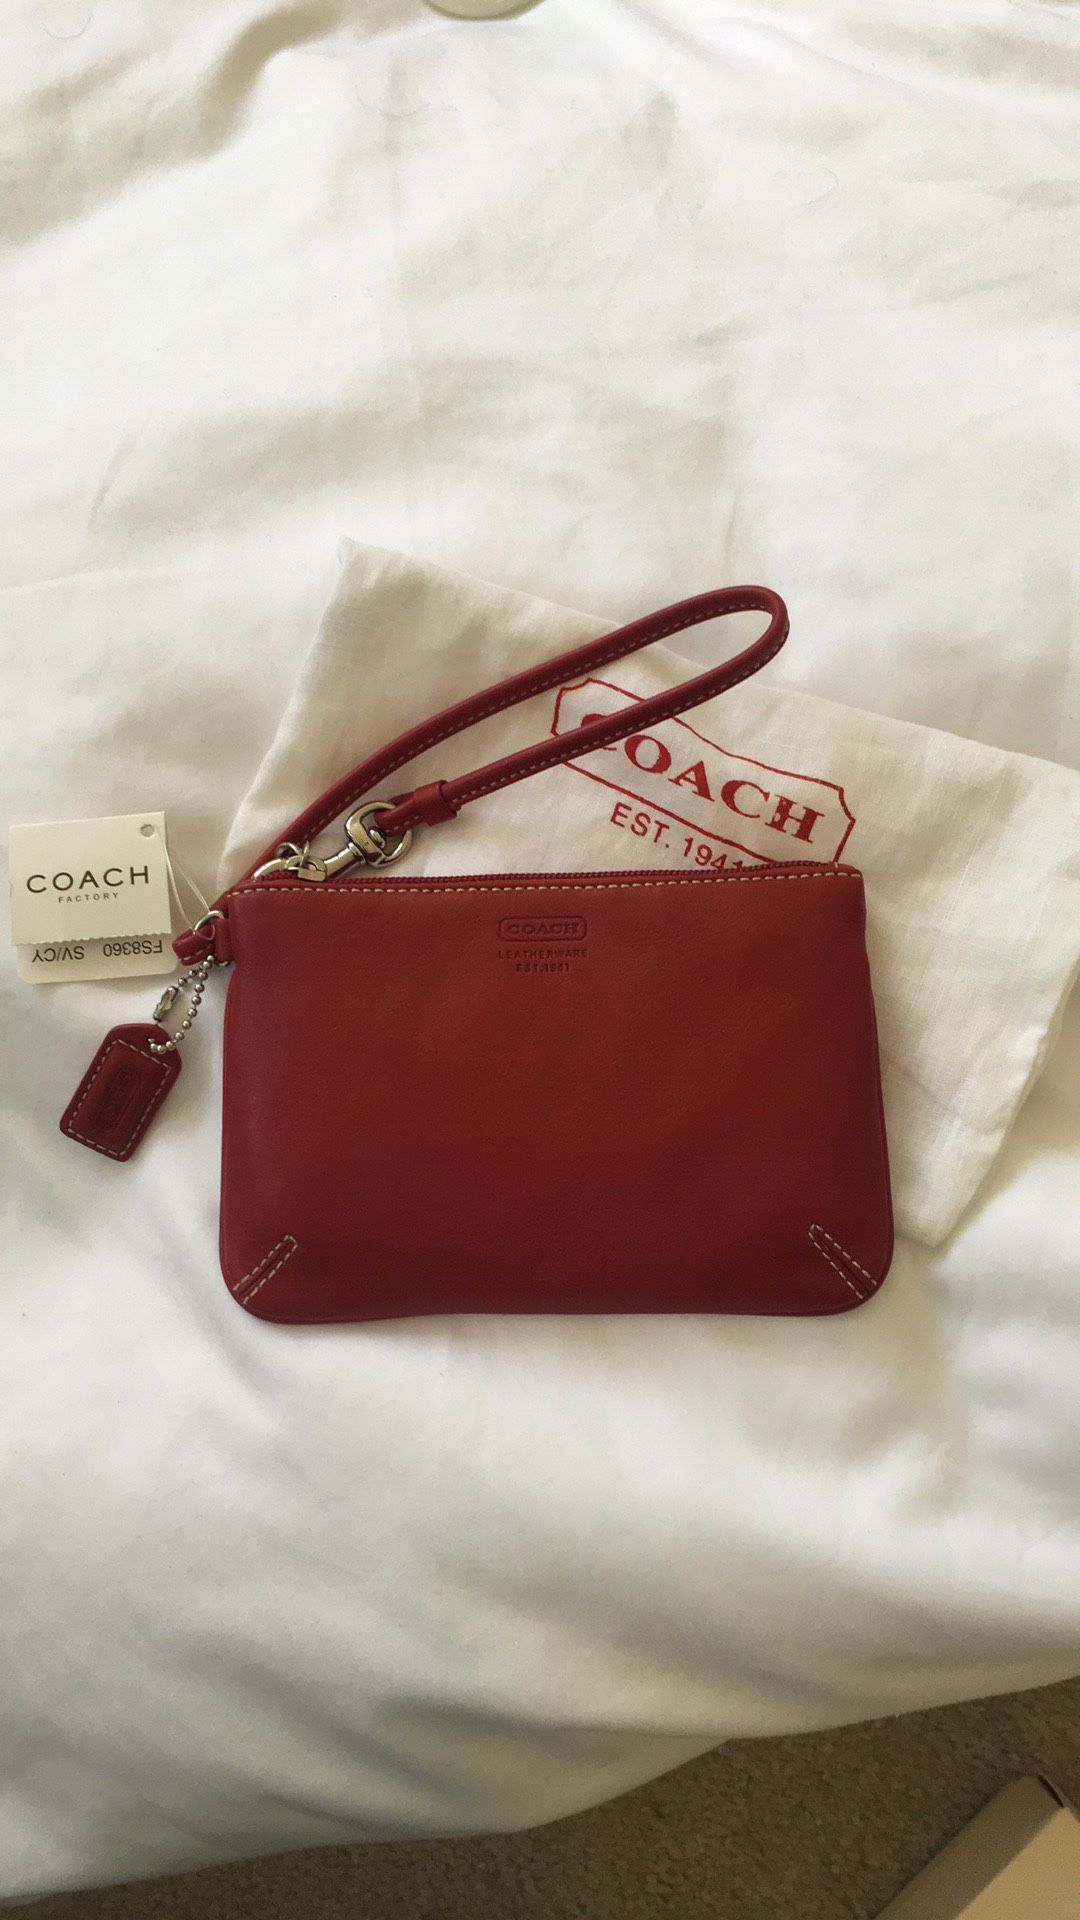 Brand new red leather Coach purse